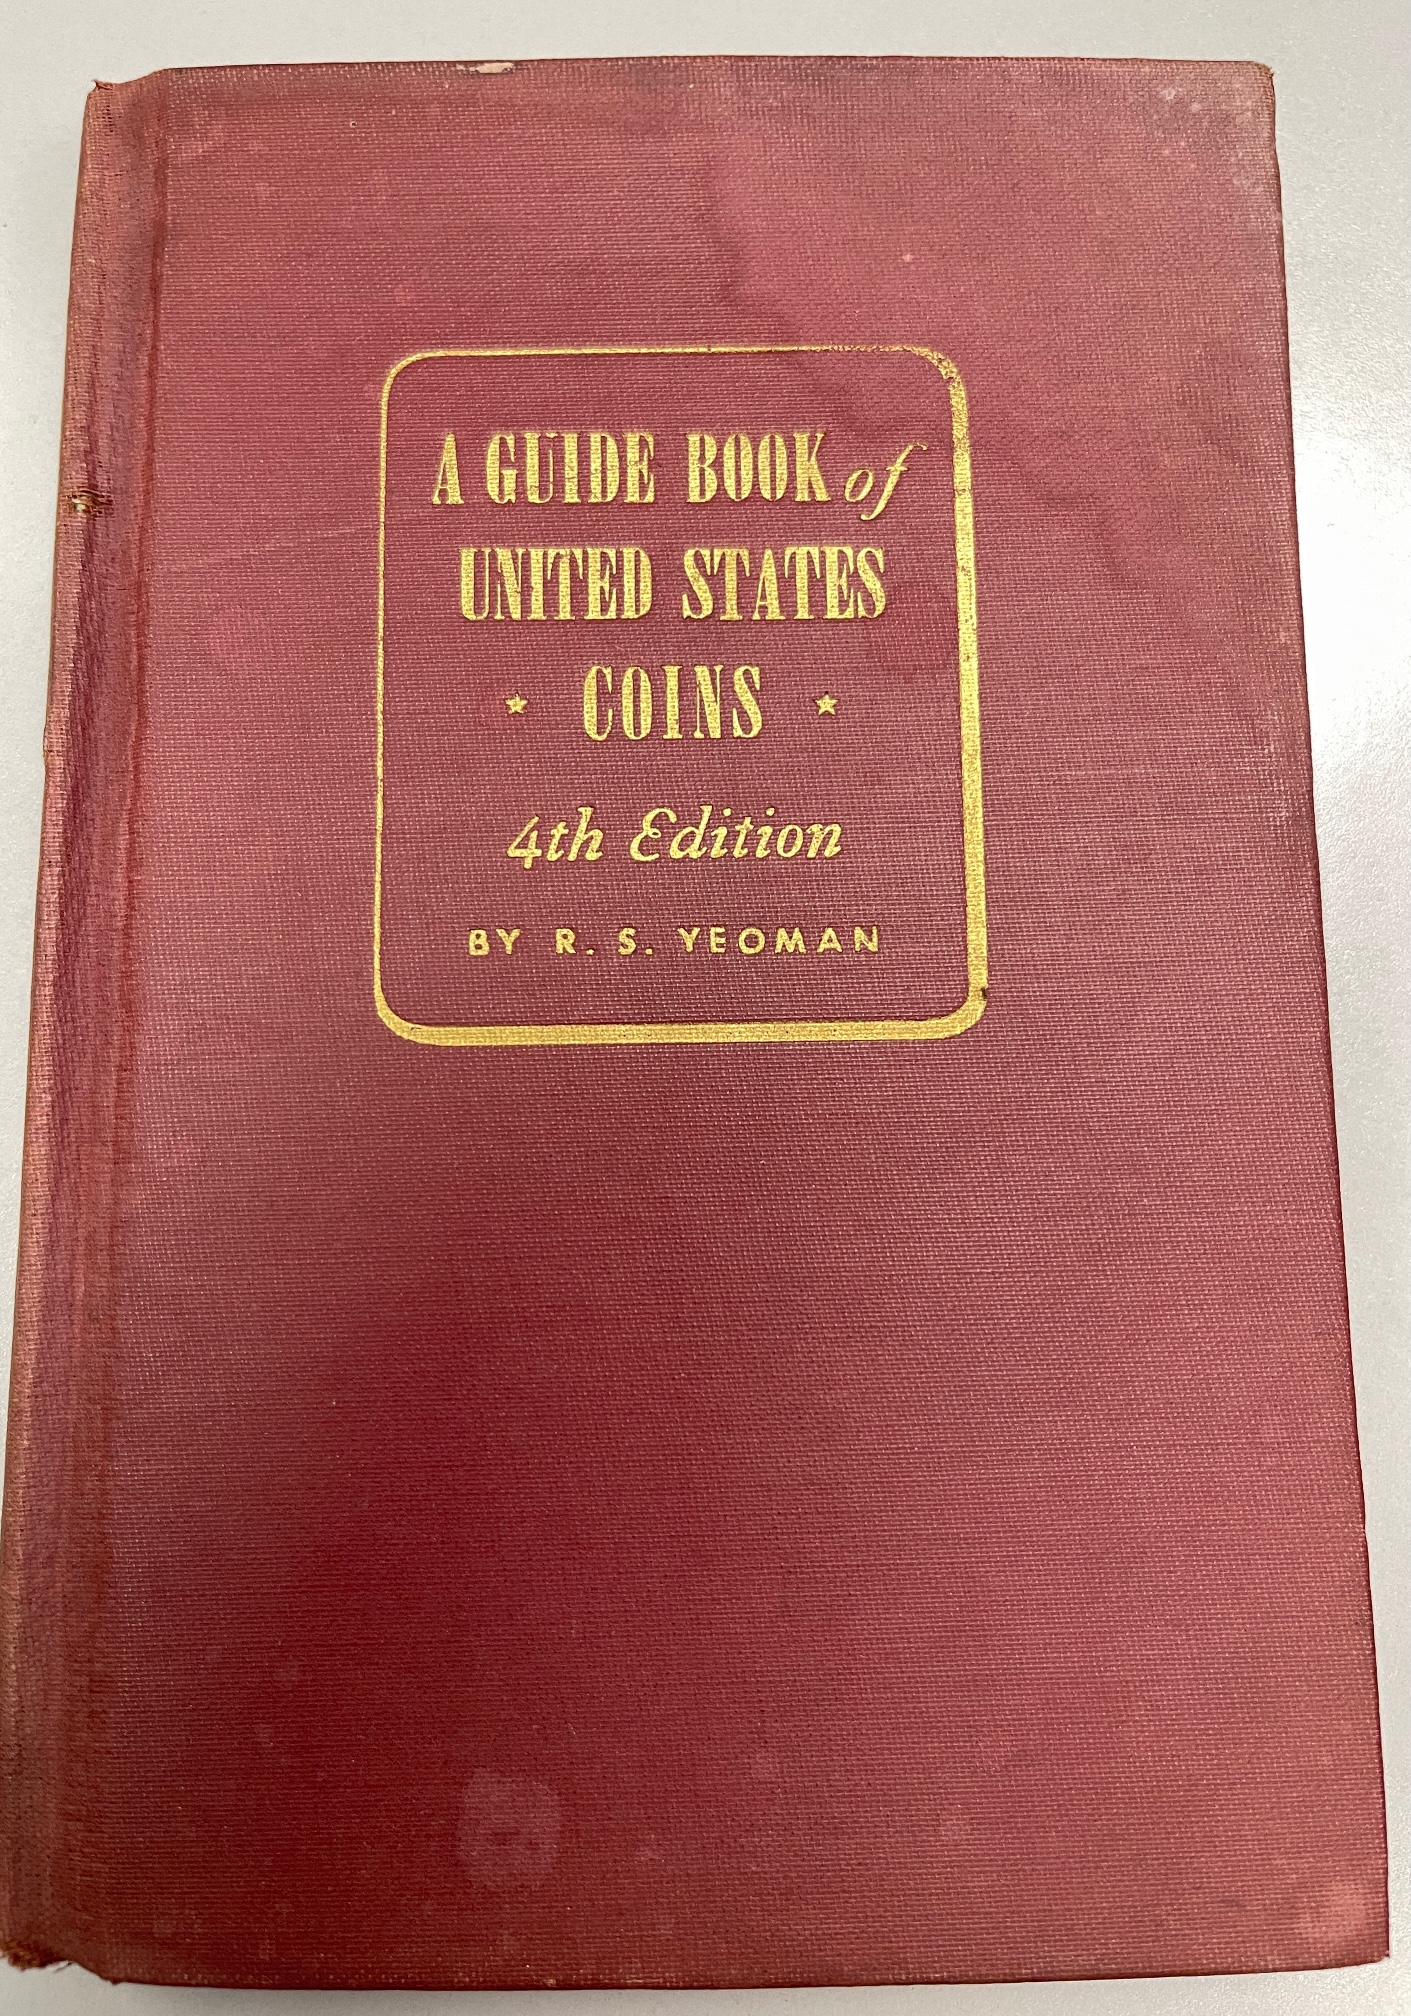 1991 Red Book A Guide Book of United States Coins Price Guide 44th Edition 